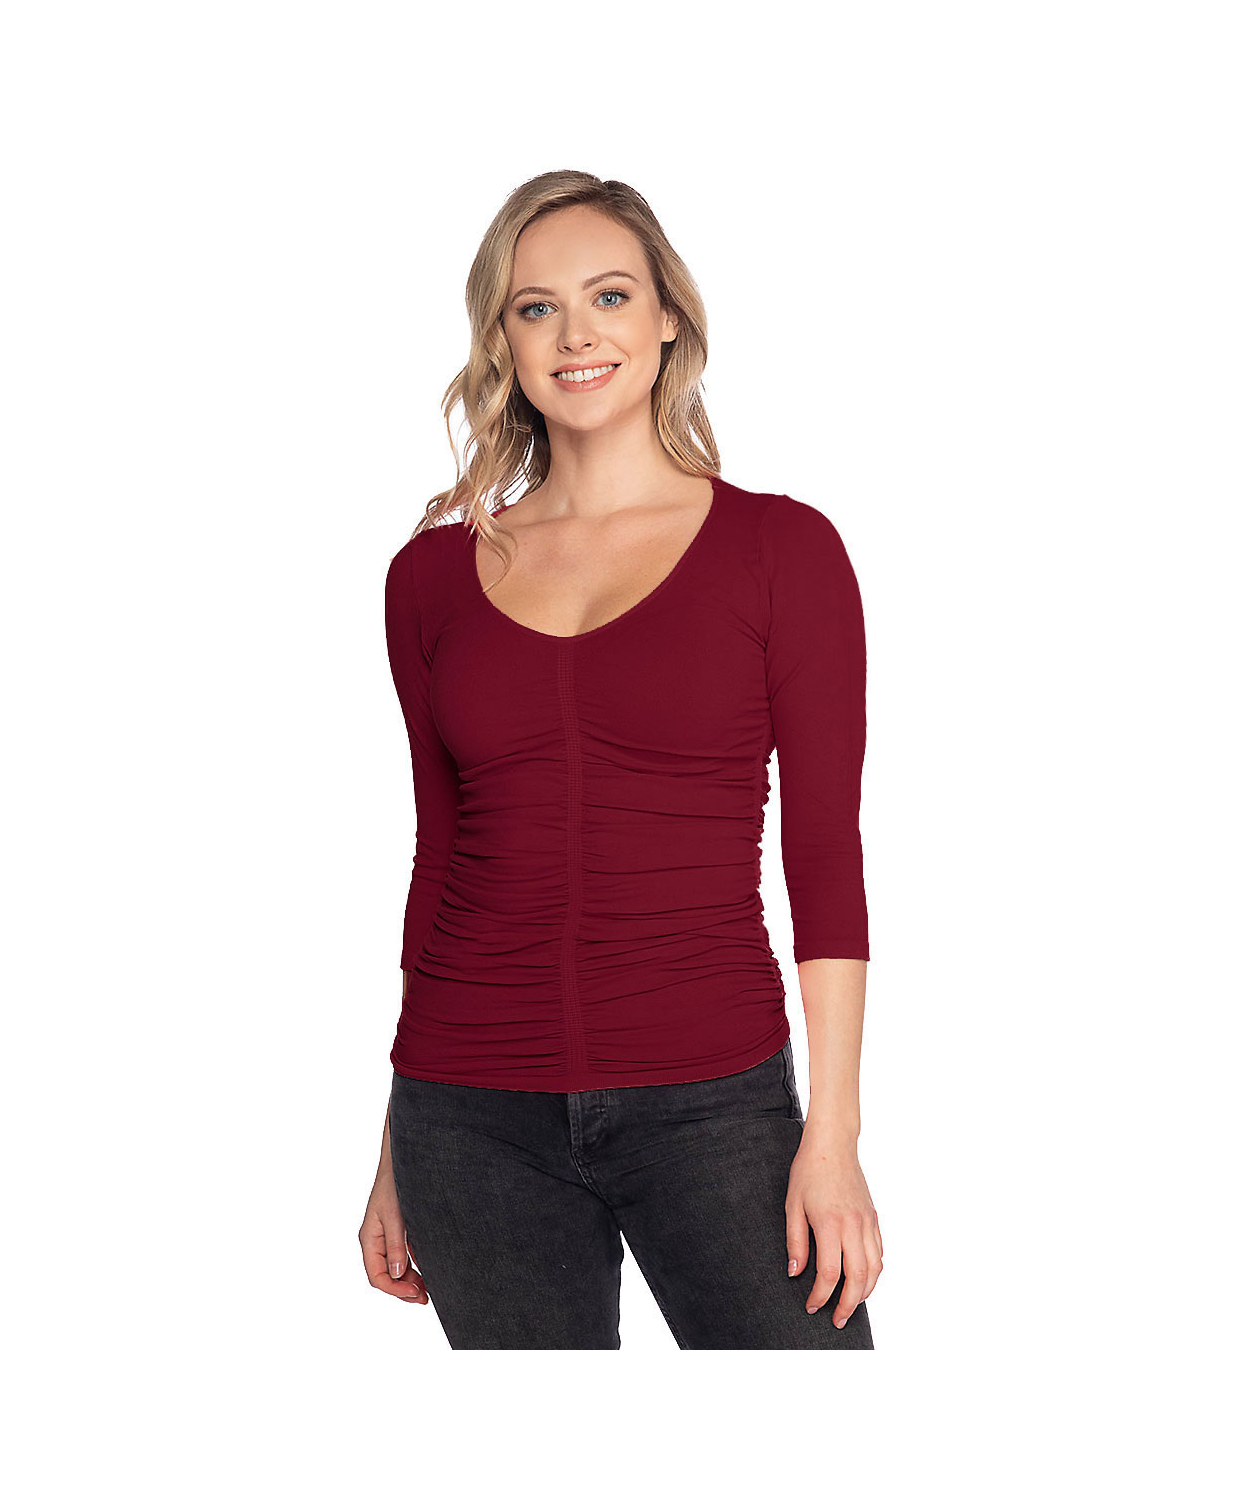 https://lasttango.us/media/catalog/product/cache/58bcfb769cf3247e0aad1ee16b65d108/r/o/rouched-center-seamless-3-4-sleeve-top-lycra-1315-burgundy-_3__2_1.jpg